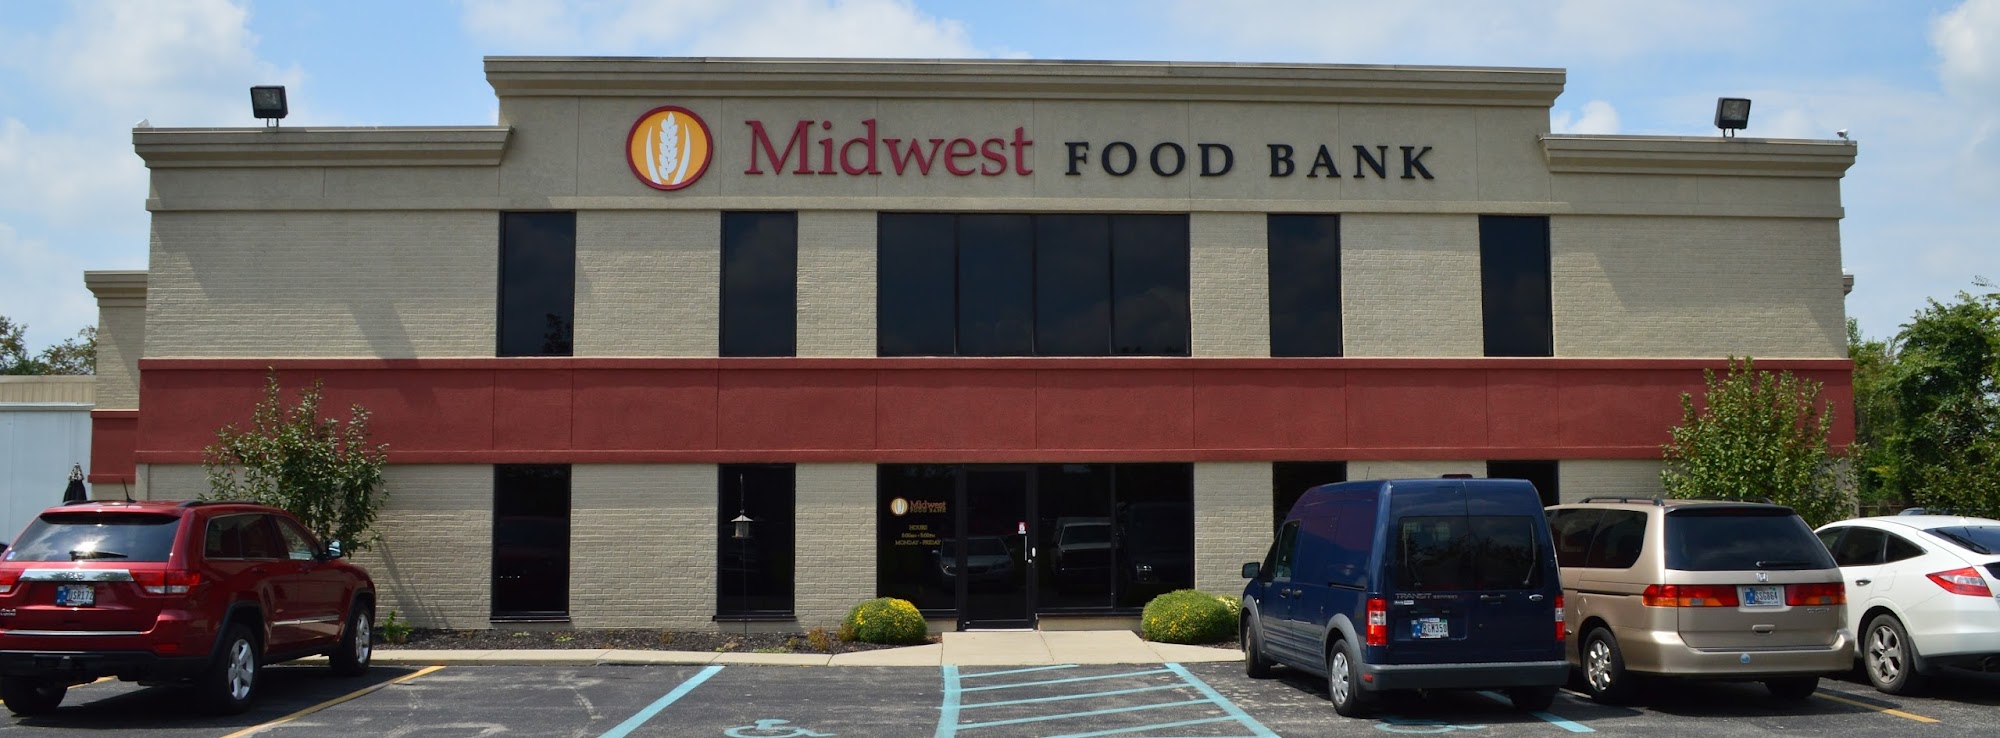 Midwest Food Bank -- Indiana Division